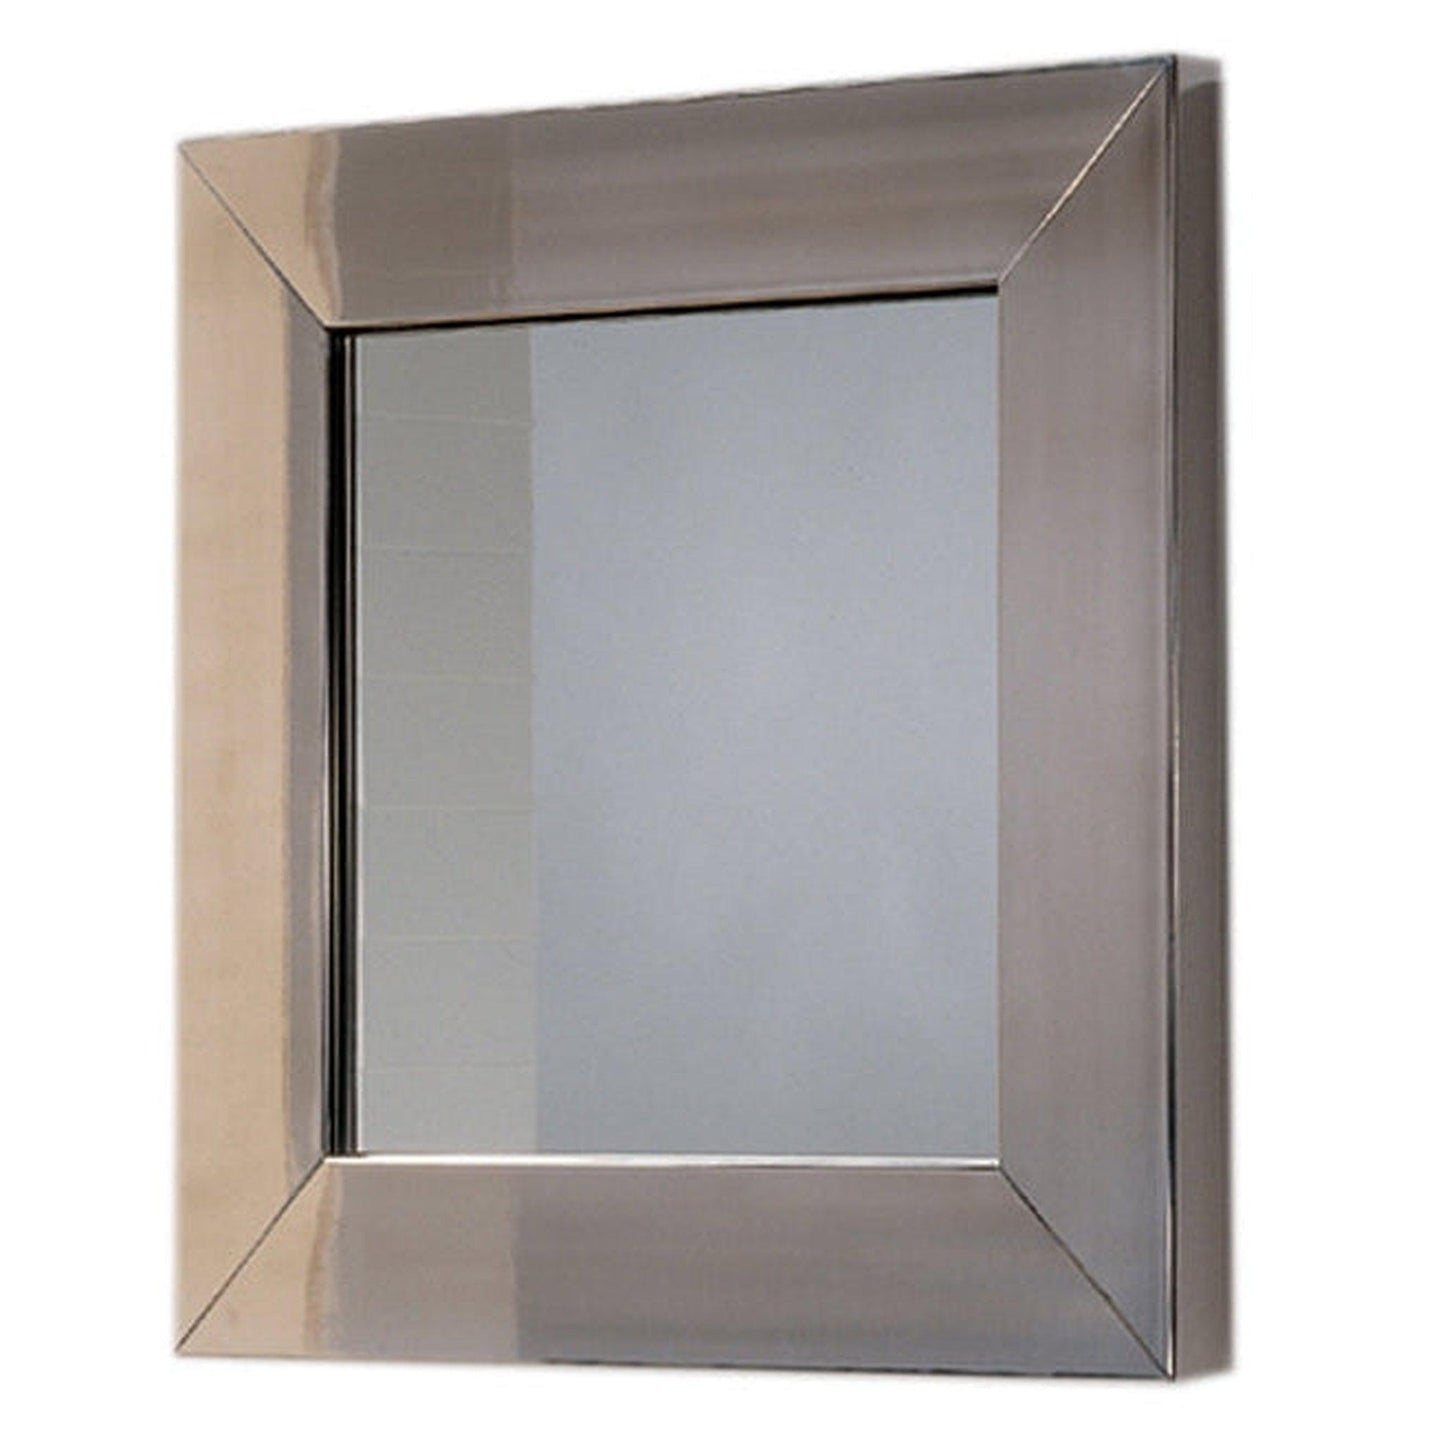 Whitehaus New Generation WHE5B Square Mirror With Polished Stainless Steel Frame